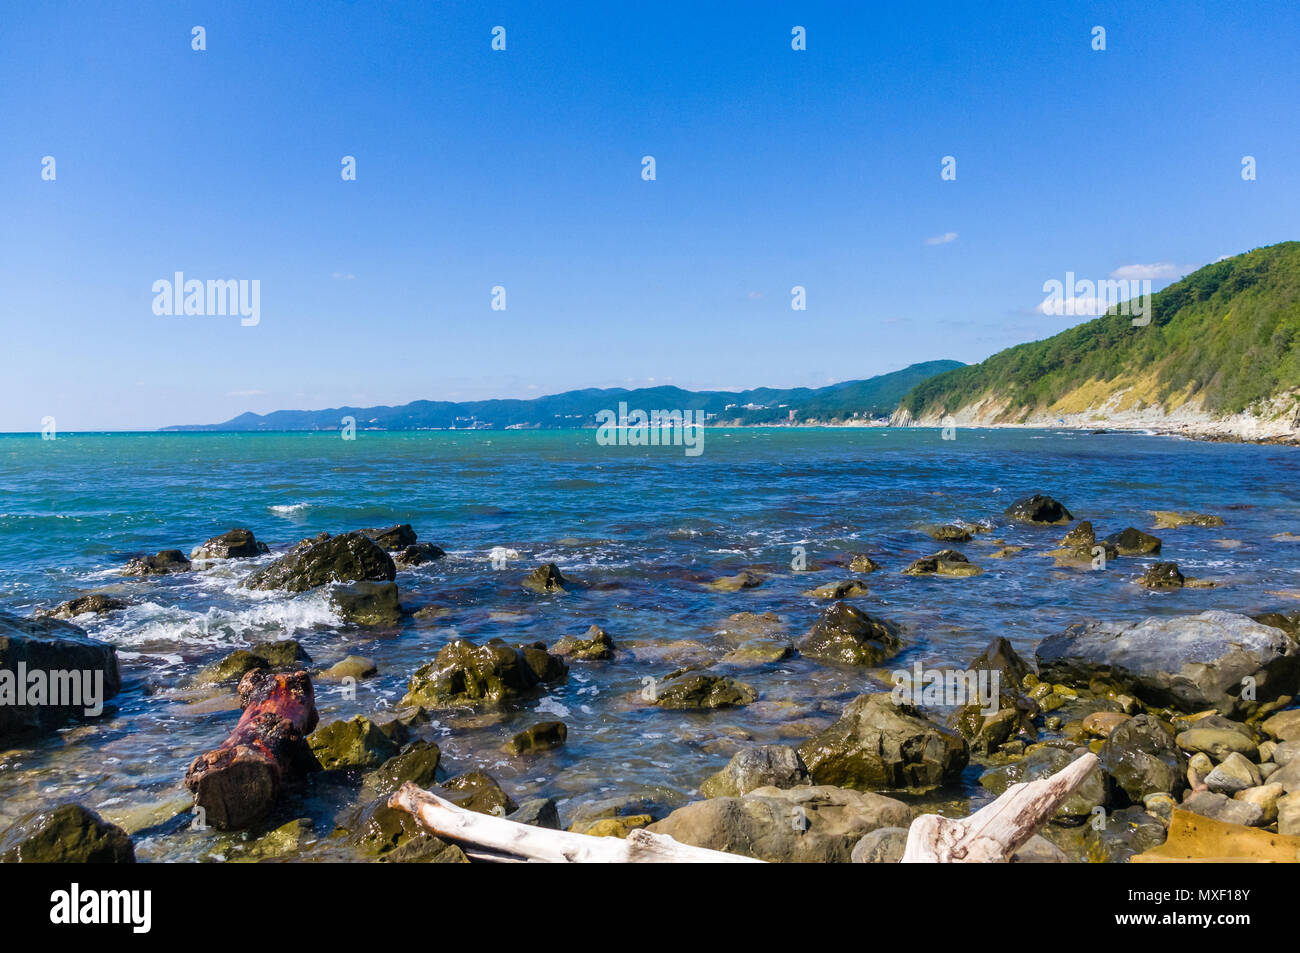 rocky sea shore with pebble beach, waves with foam Stock Photo